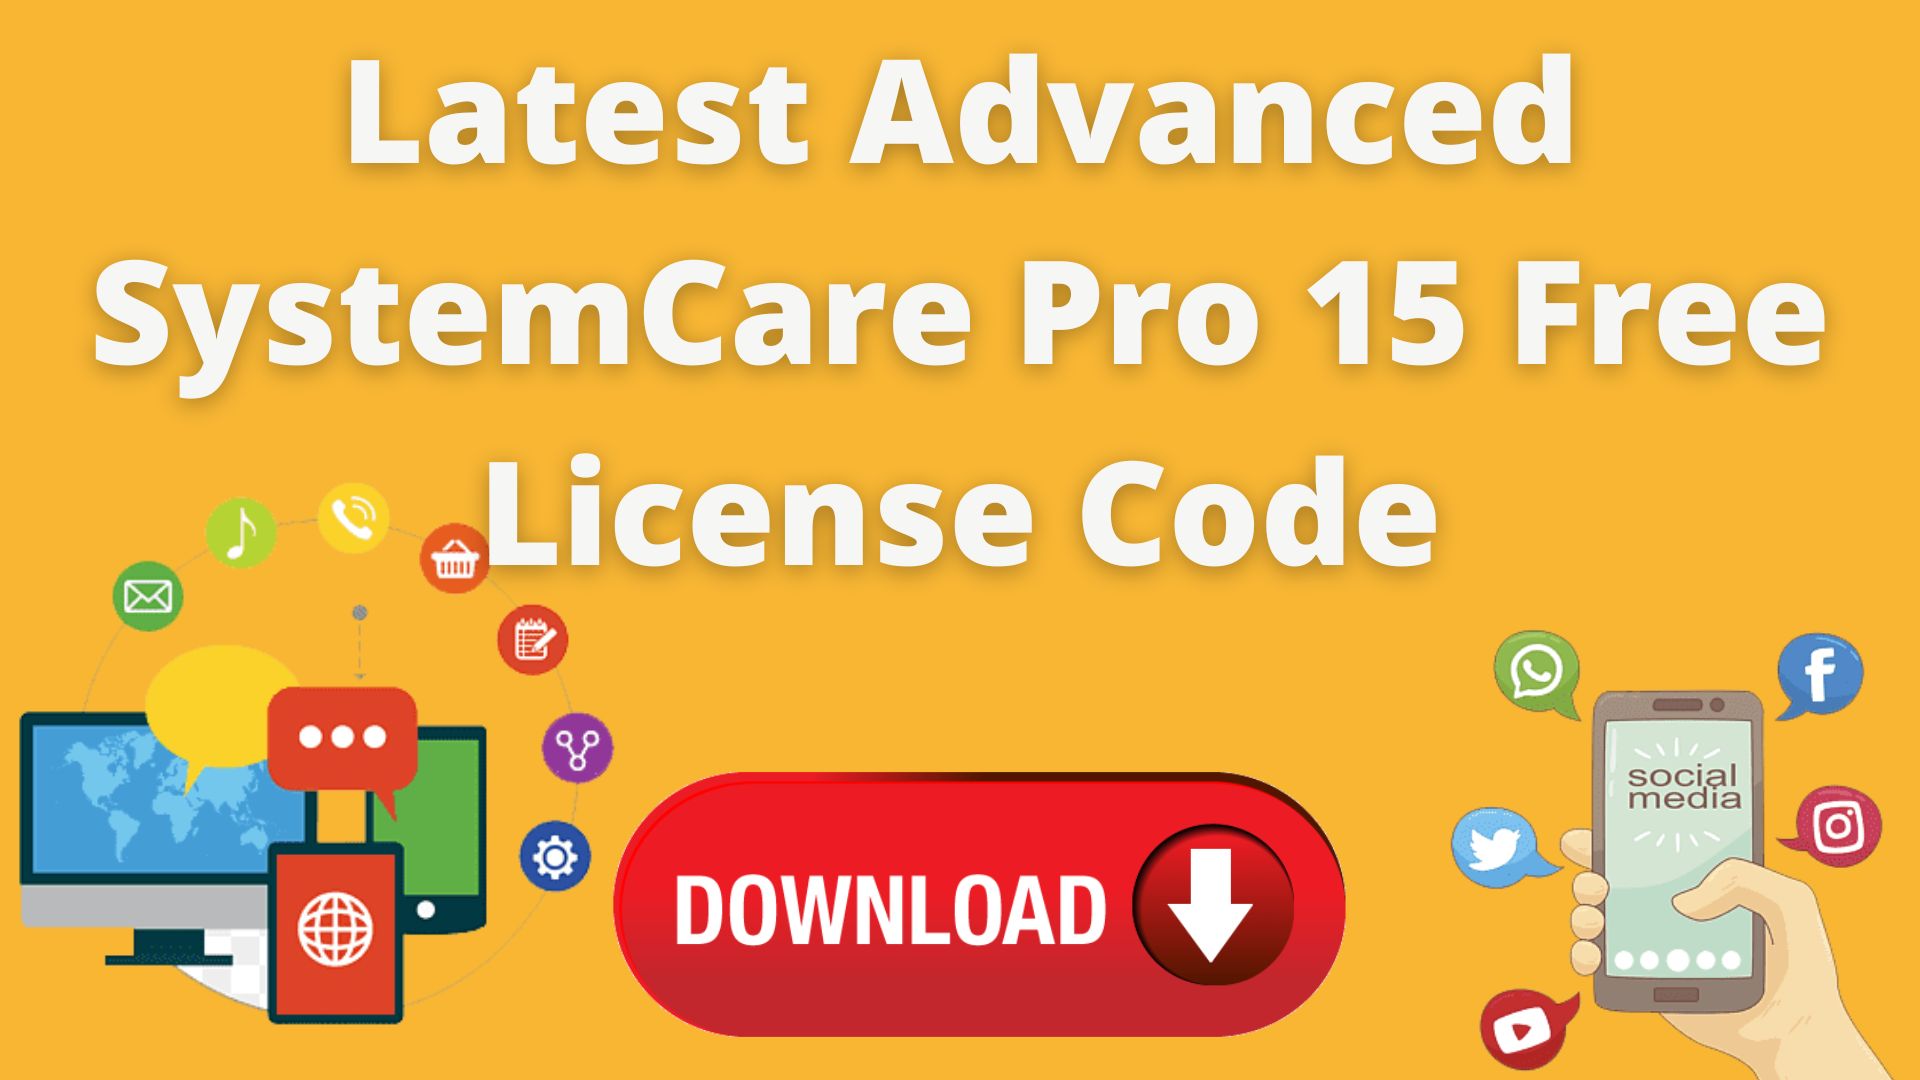 Latest Advanced SystemCare Pro 15 Free License CodeHere are some important features of Advanced SystemCare Pro 15: